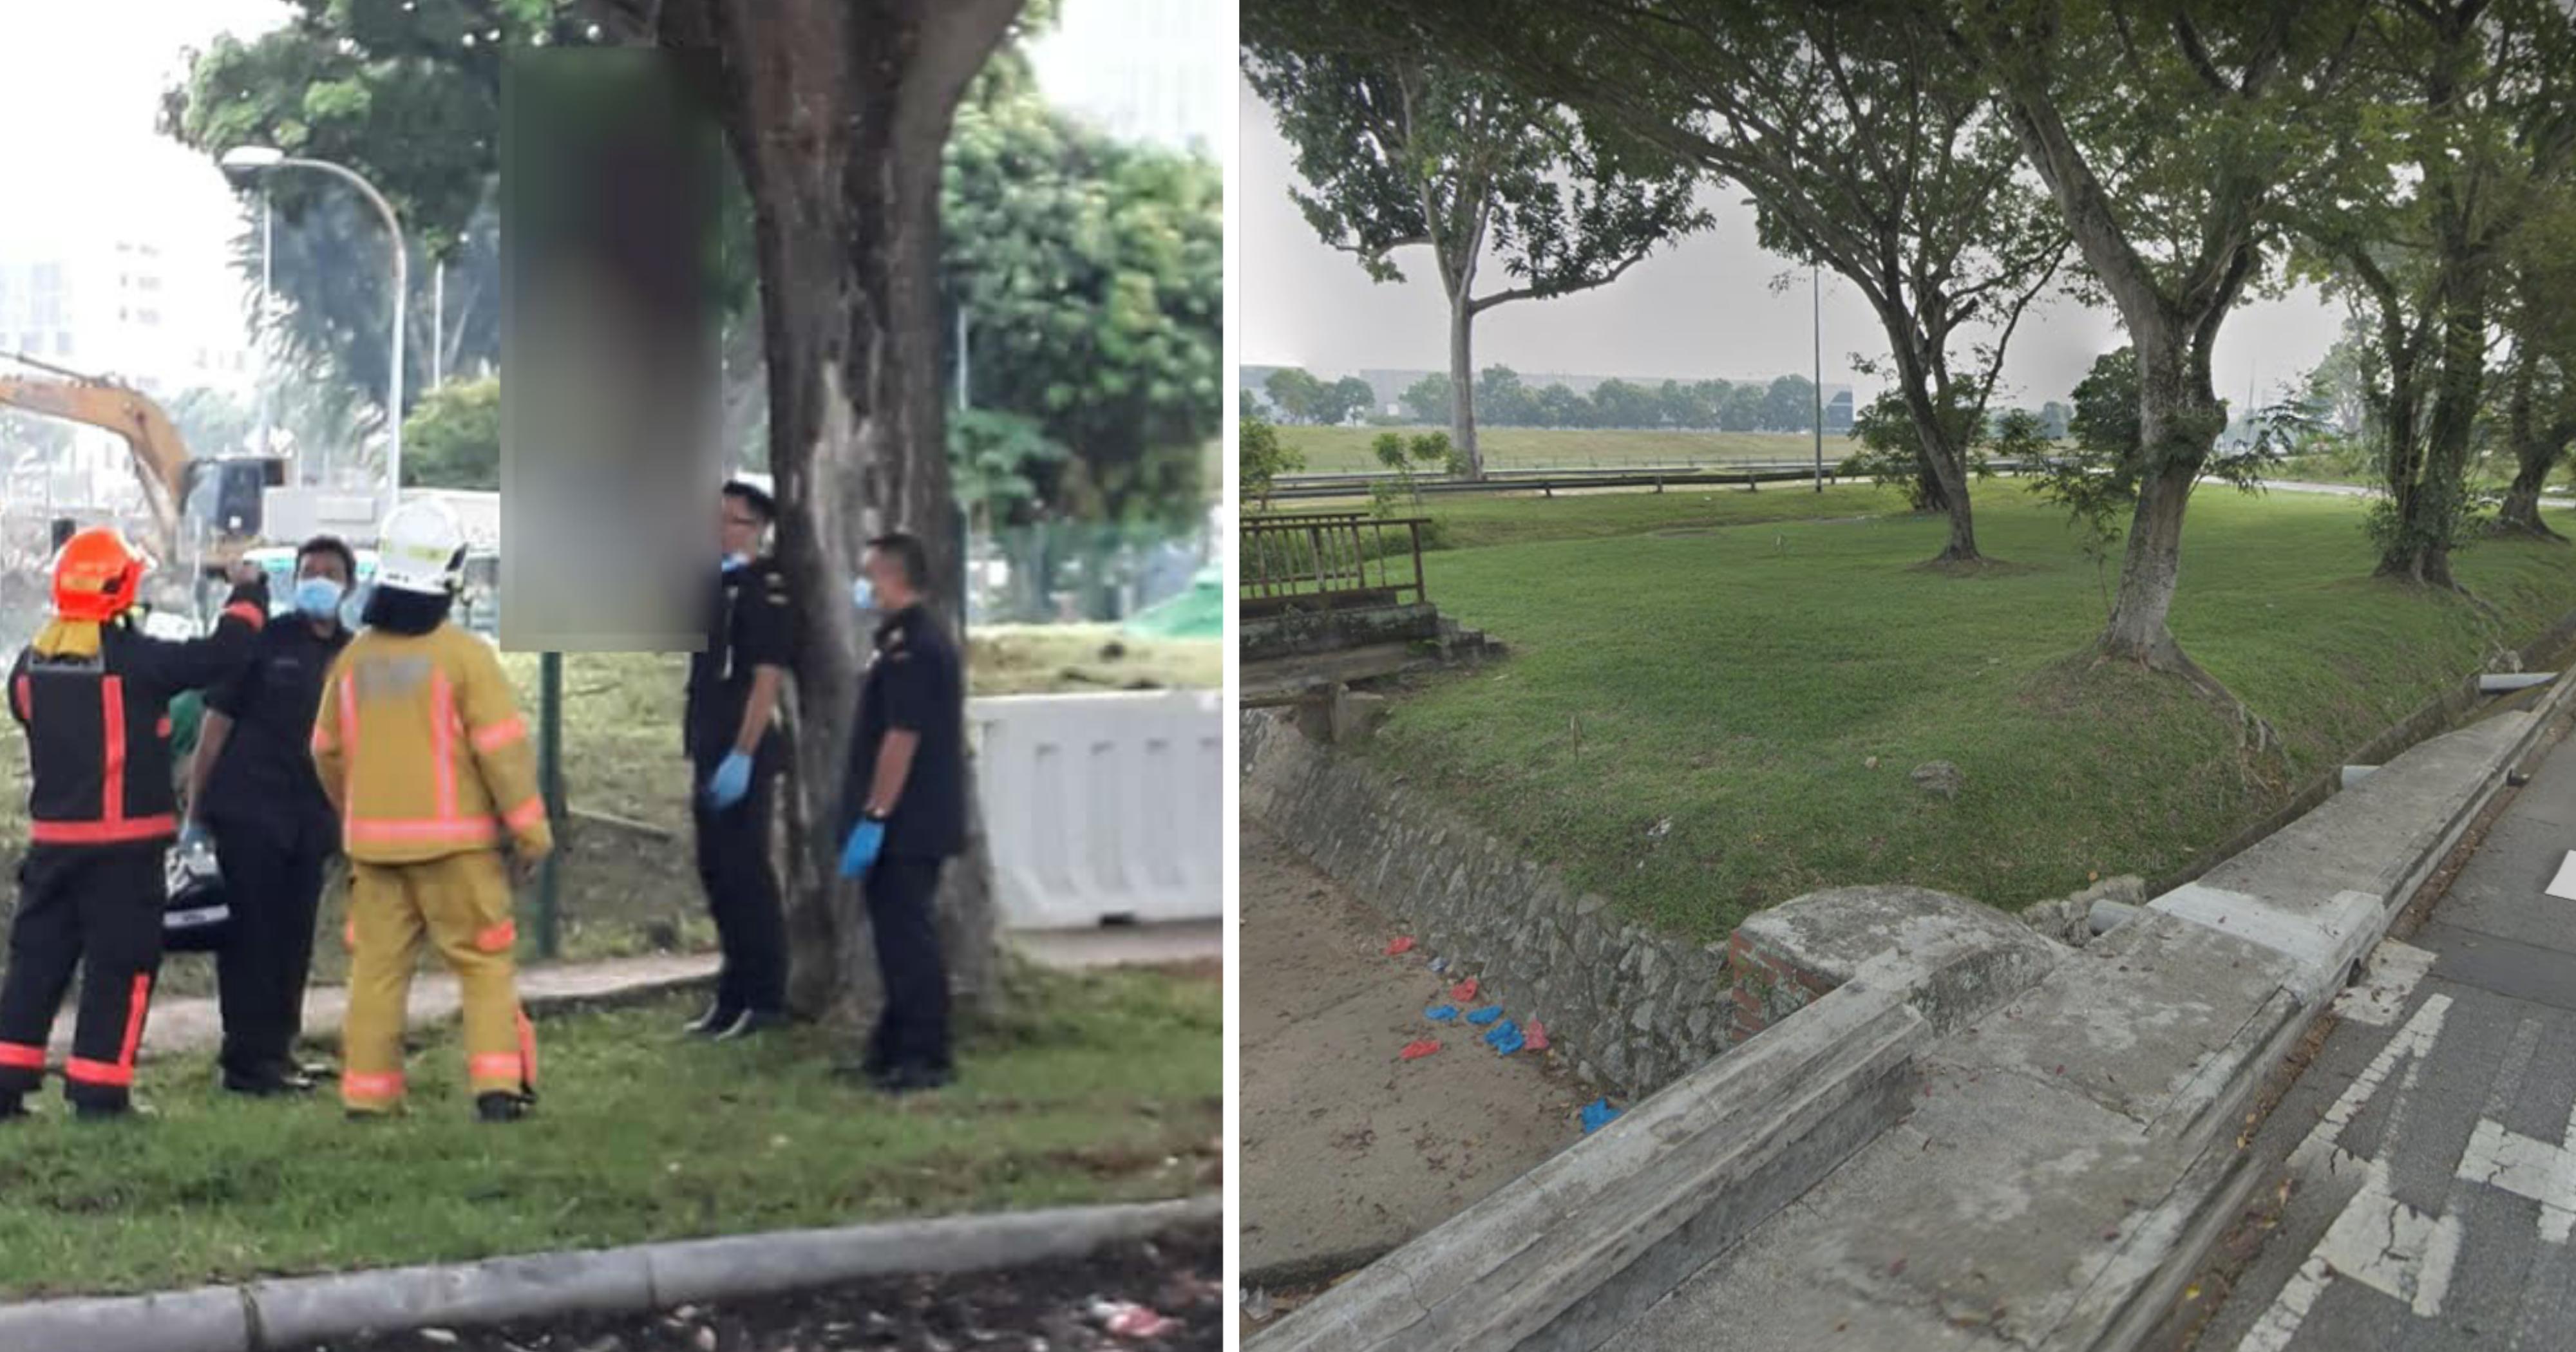 Man found hanging from tree near Tampines Road on Oct. 30, 2019